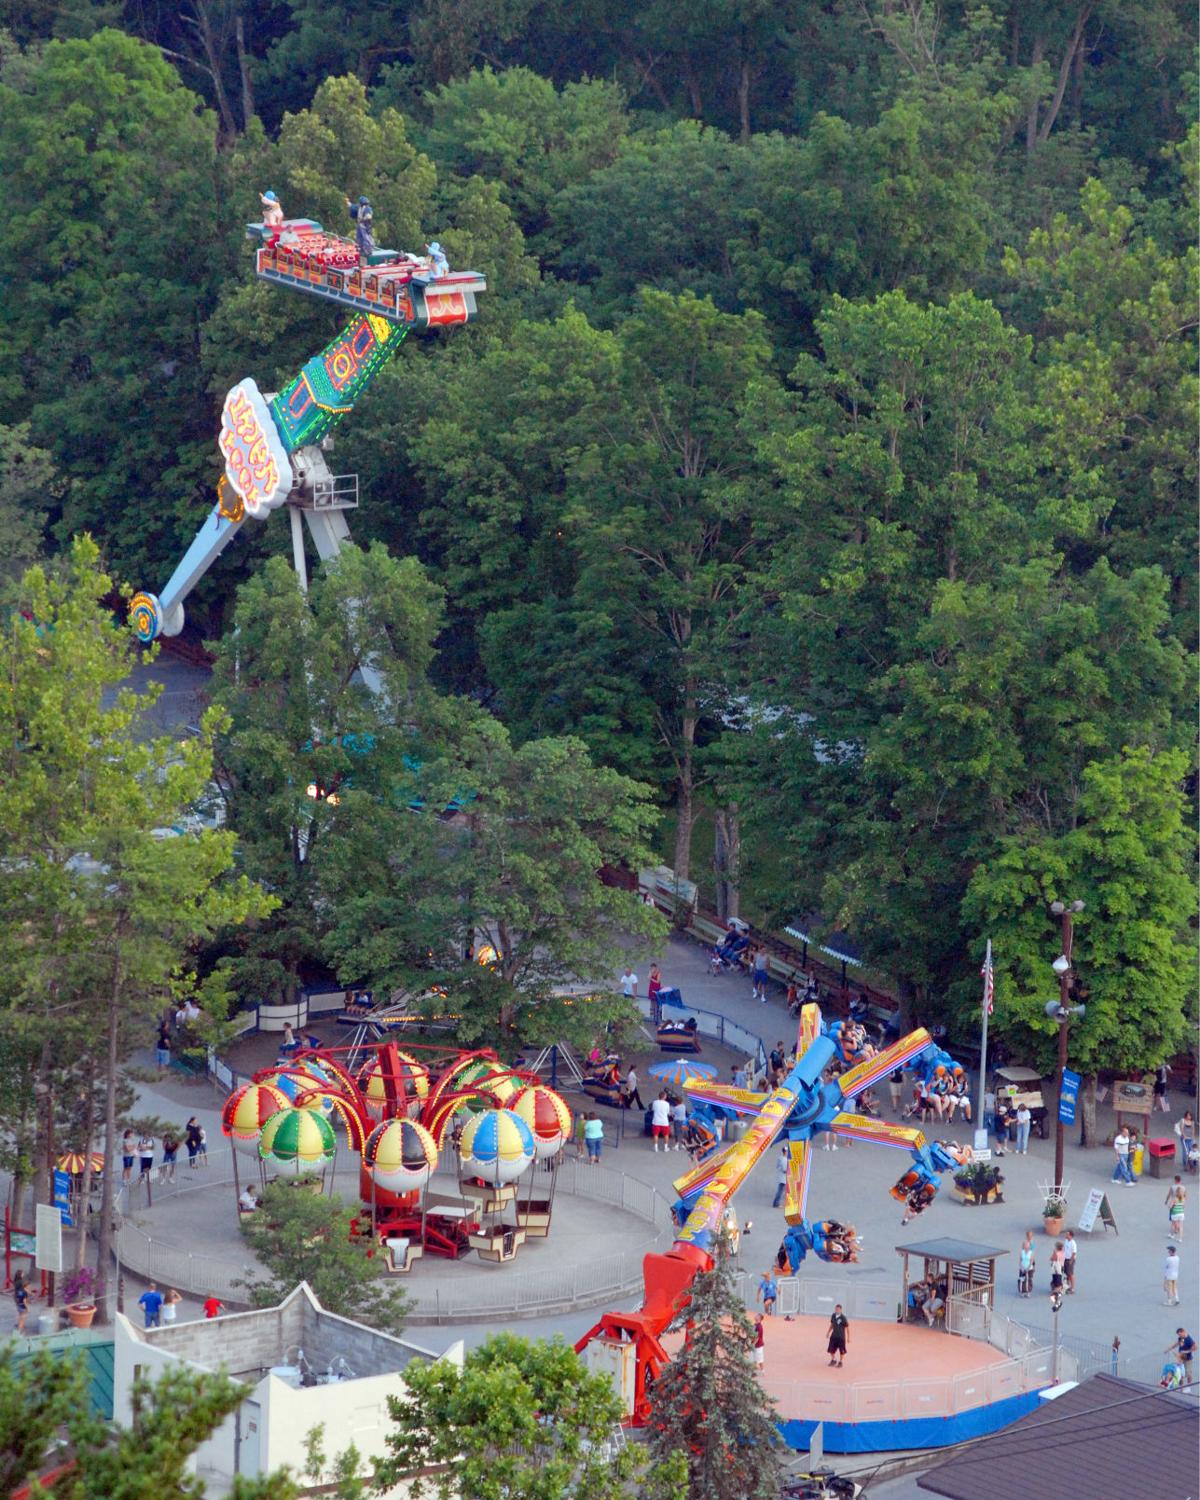 Knoebels announces addition, replacement of rides for 2020 season